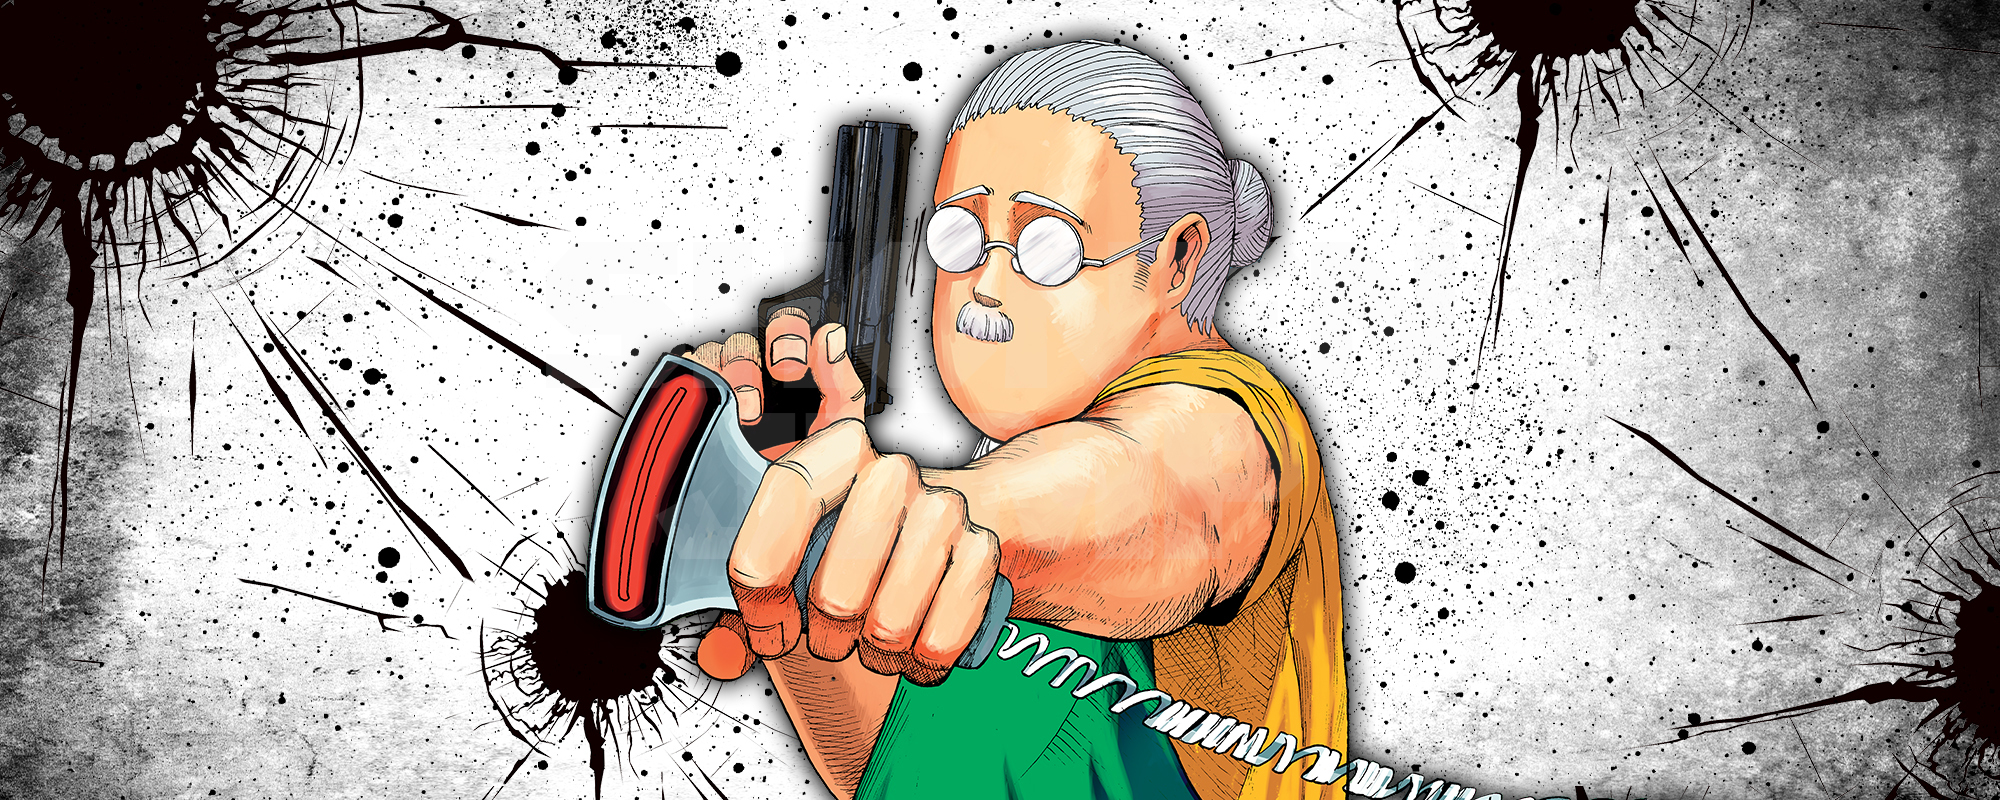 Unveiling Sakamoto Days The Action-Packed Manga Taking Twitter by Storm